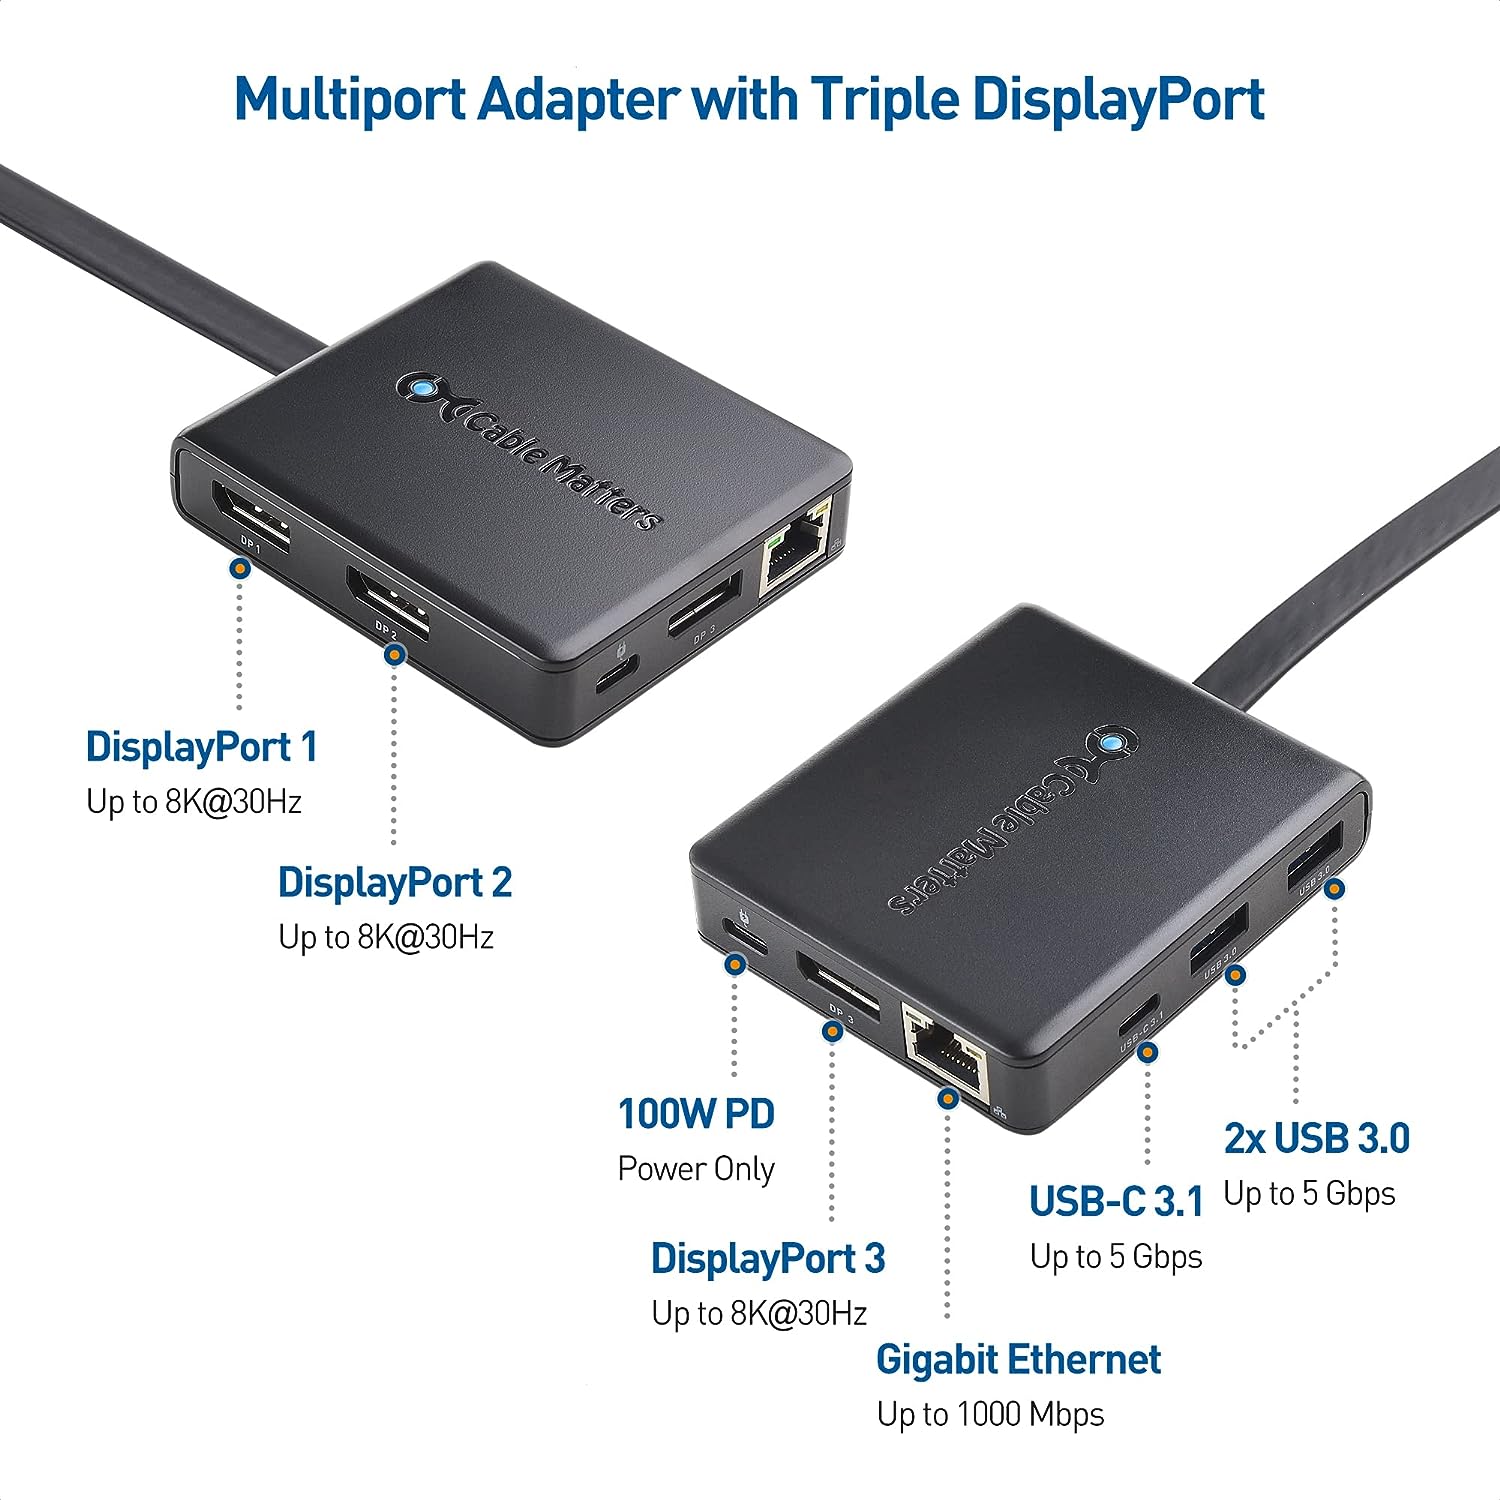 Cable Matters Triple Monitor USB C Hub (USB C Dock) with 3X DisplayPort, USB-A and USB-C, Gigabit Ethernet, and 100W Charging - Thunderbolt 3, Thunderbolt 4, USB4 Compatible for Surface Pro, XPS